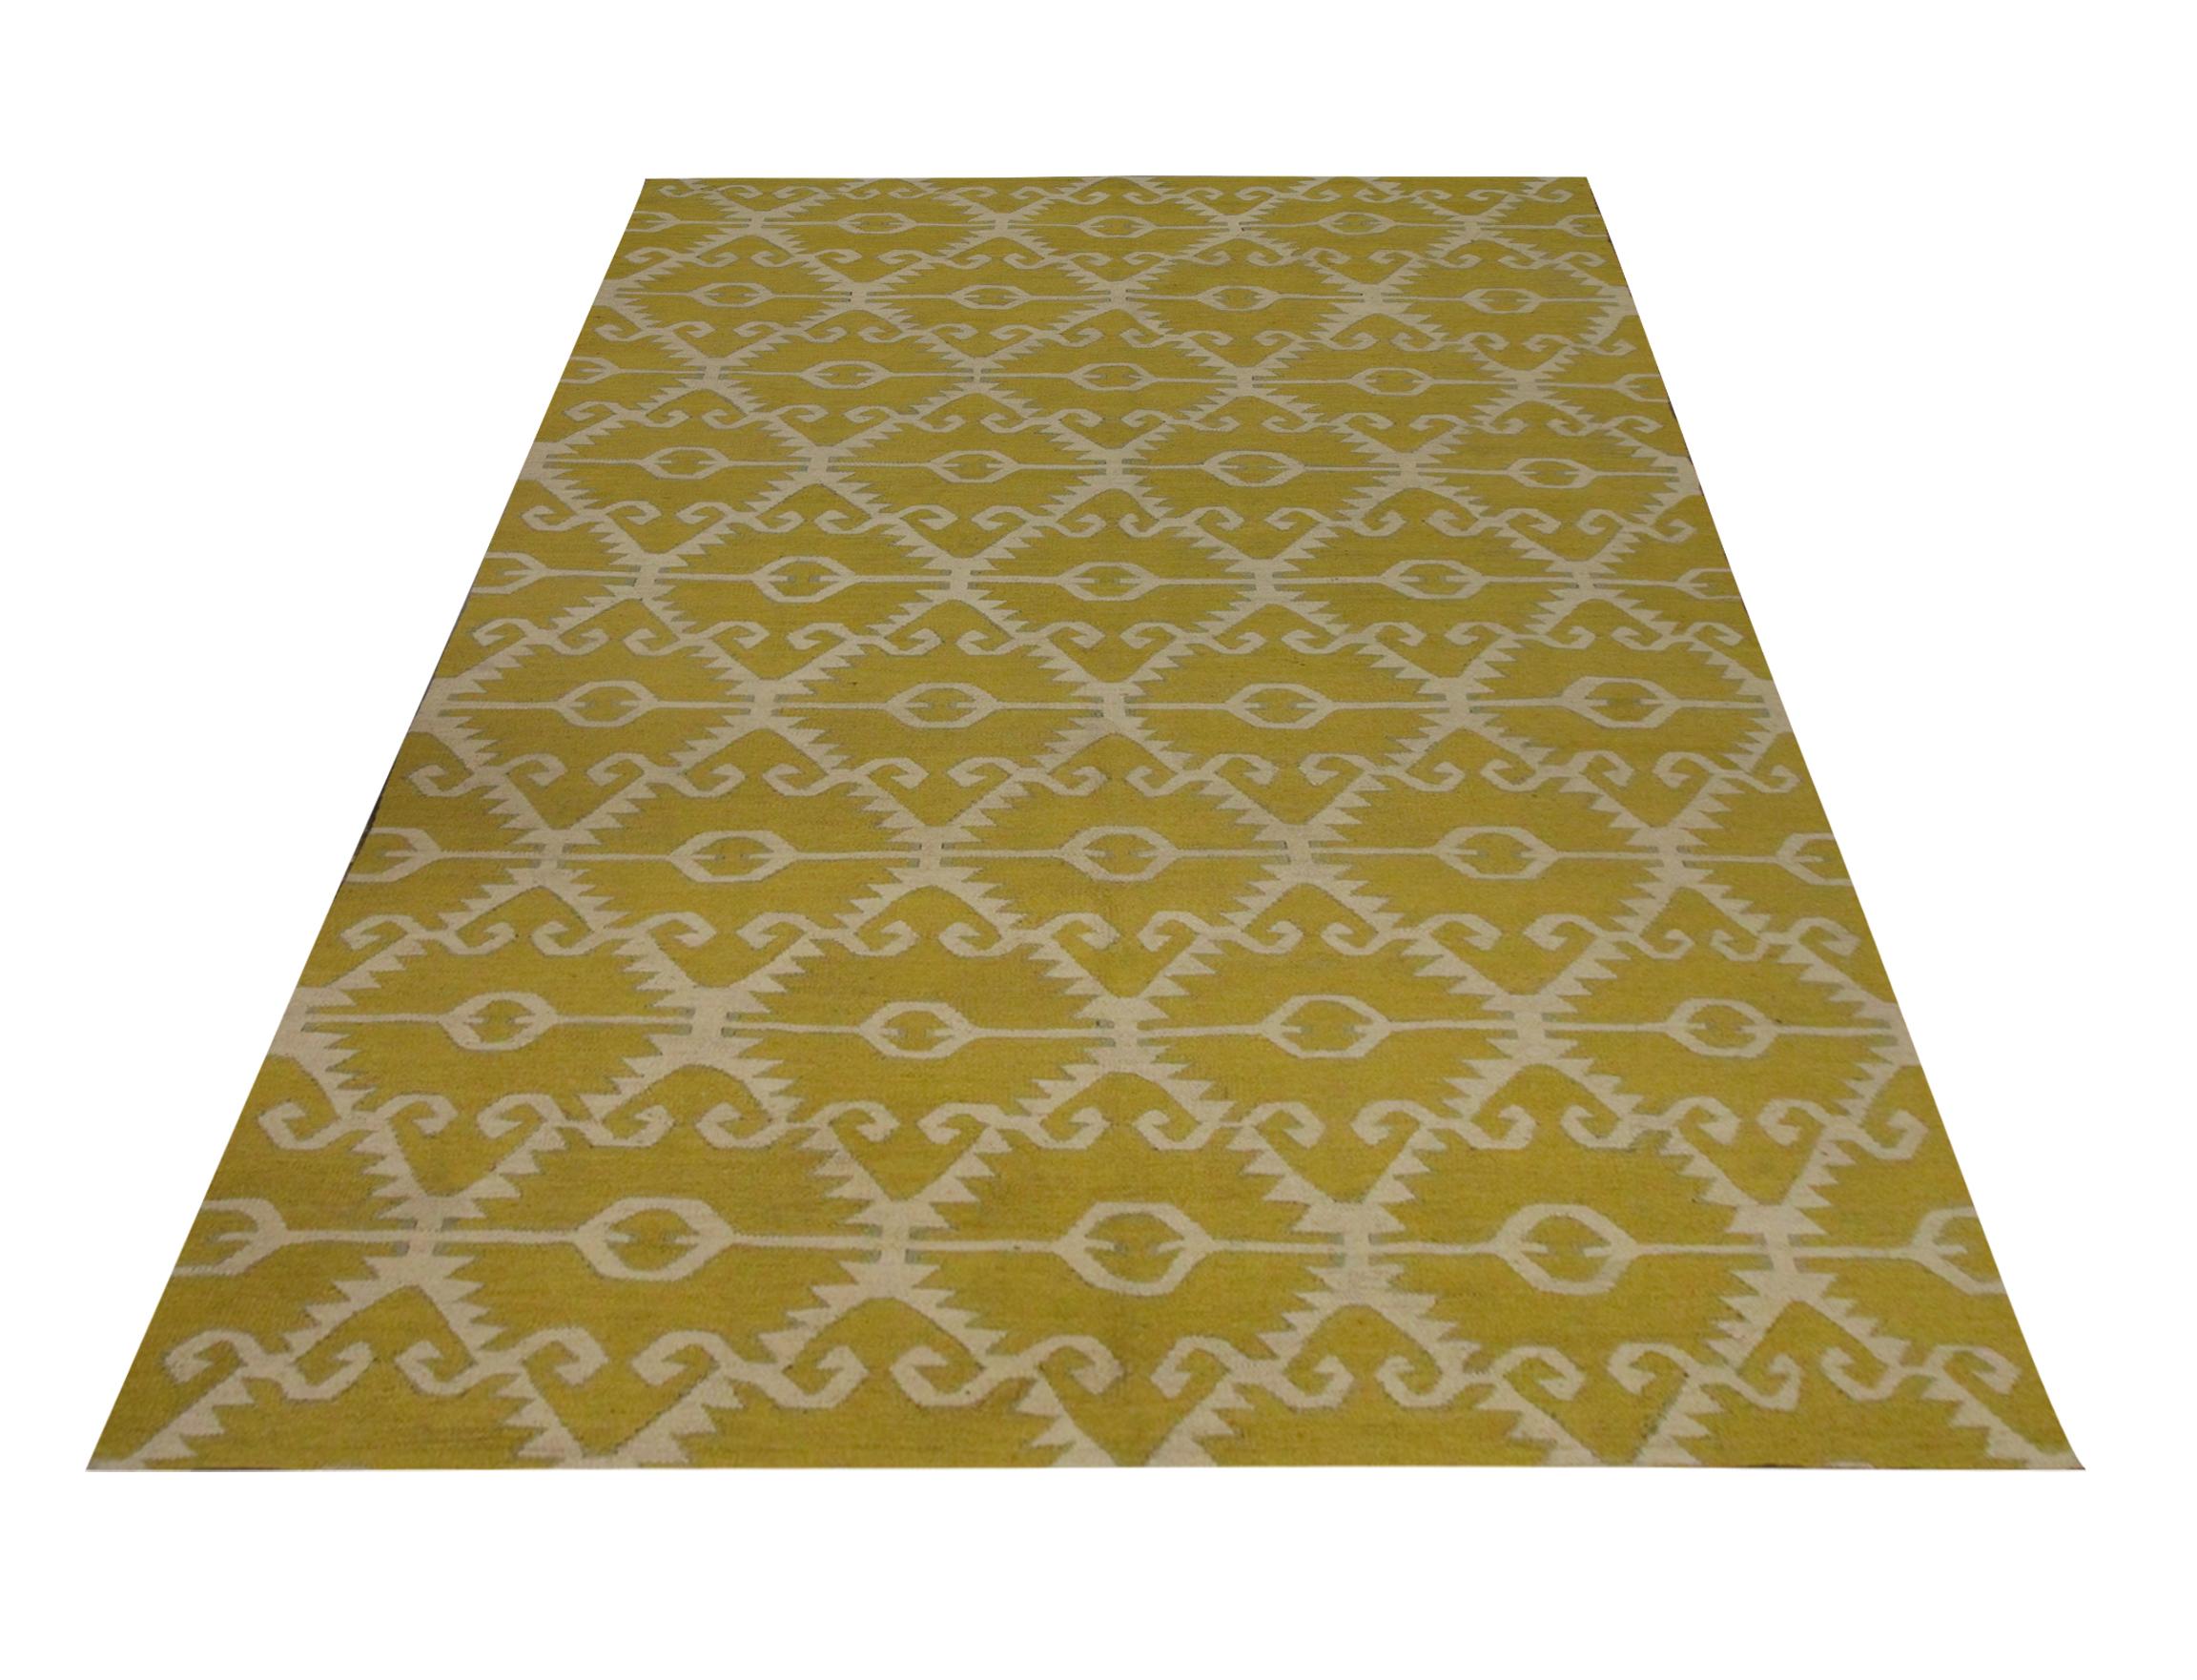 This geometric kilim is a handwoven area rug constructed in Afghanistan. The design is a bold all-over pattern woven intricately with a simple colour palette including mustard-yellow and cream. The bold design and elegant colour palette in this